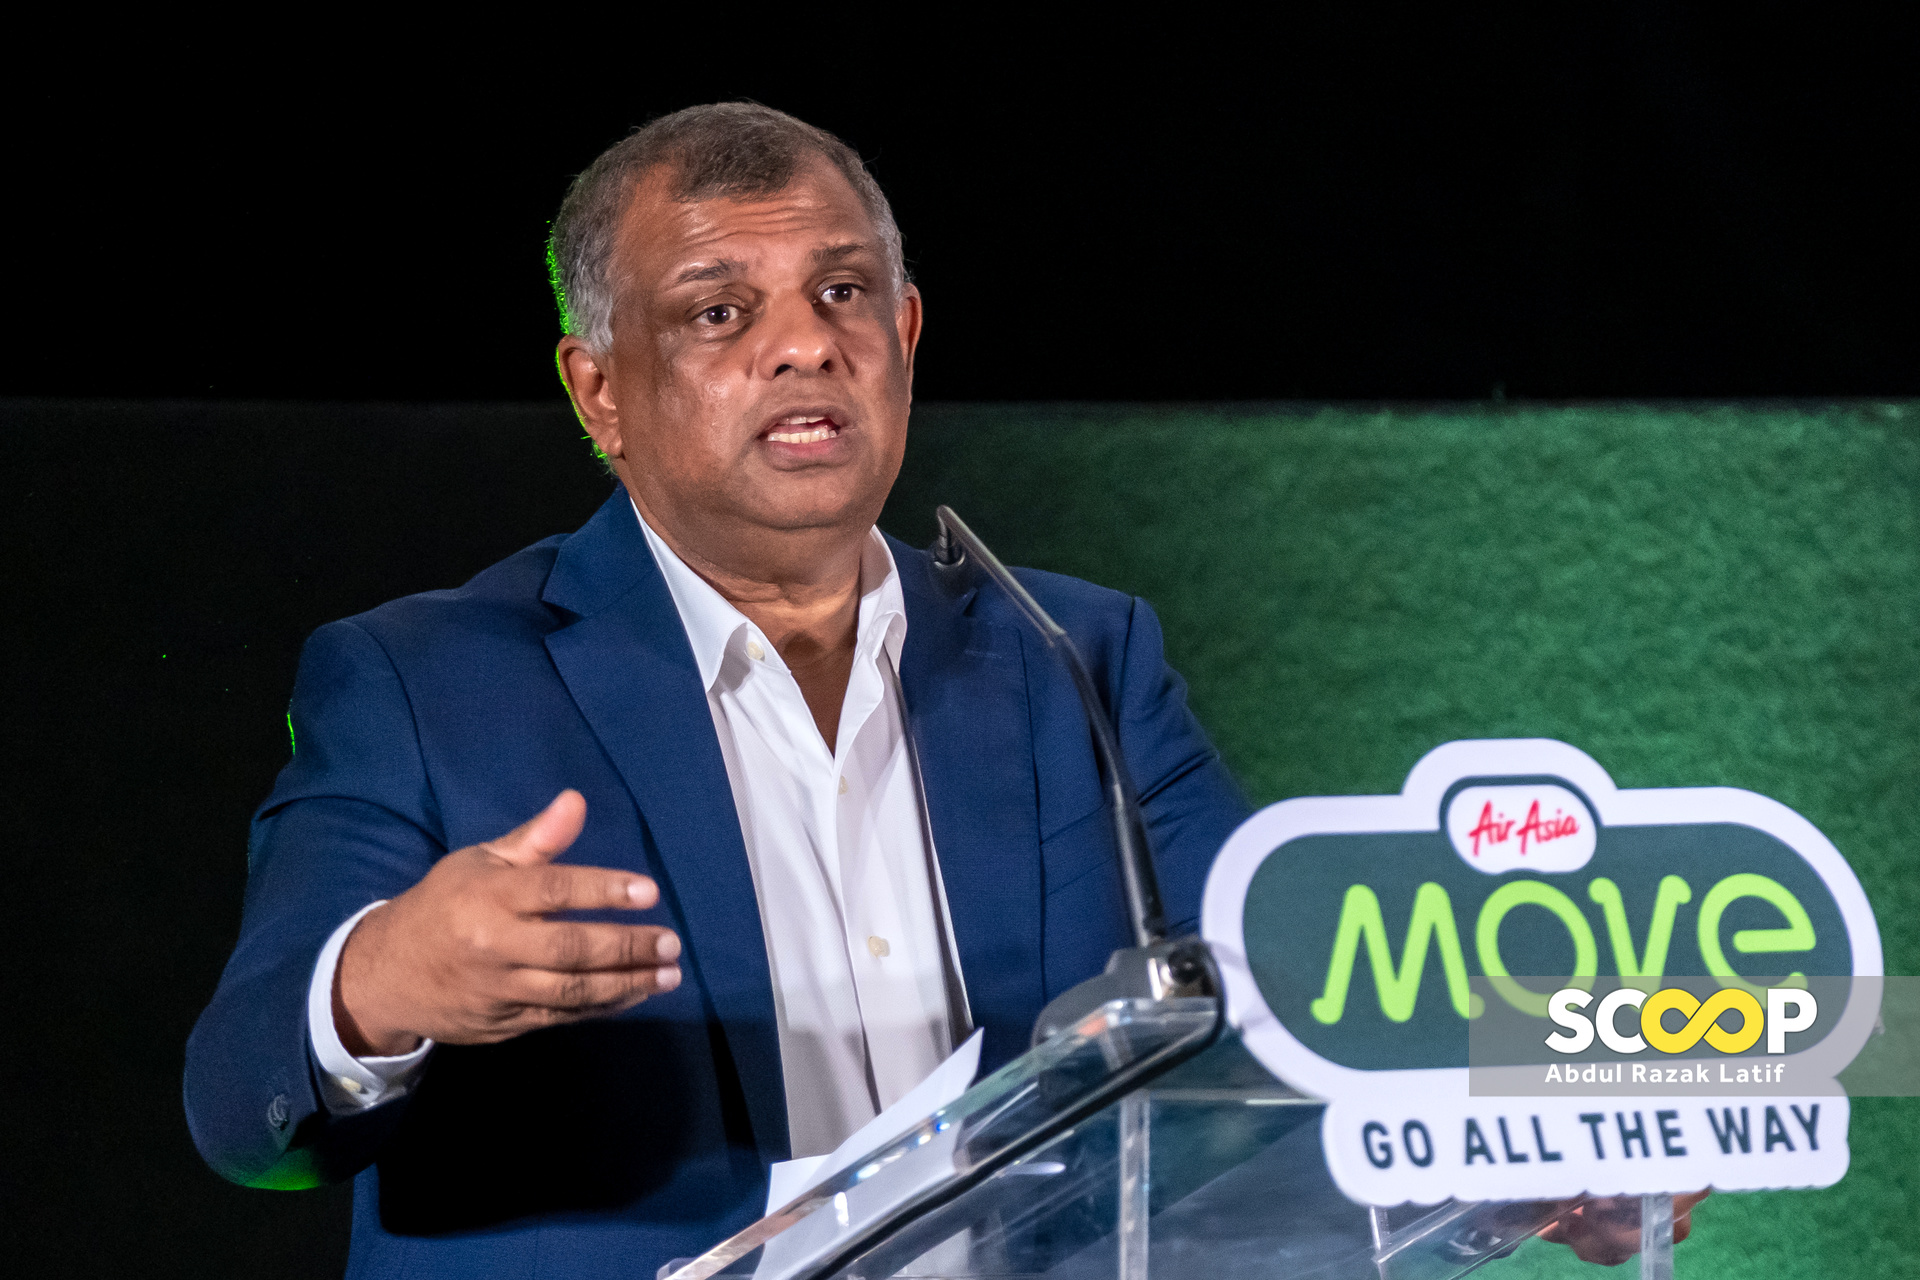 We disrupted travel before, we’ll do it again: Tony Fernandes on AirAsia Move's Asean pass